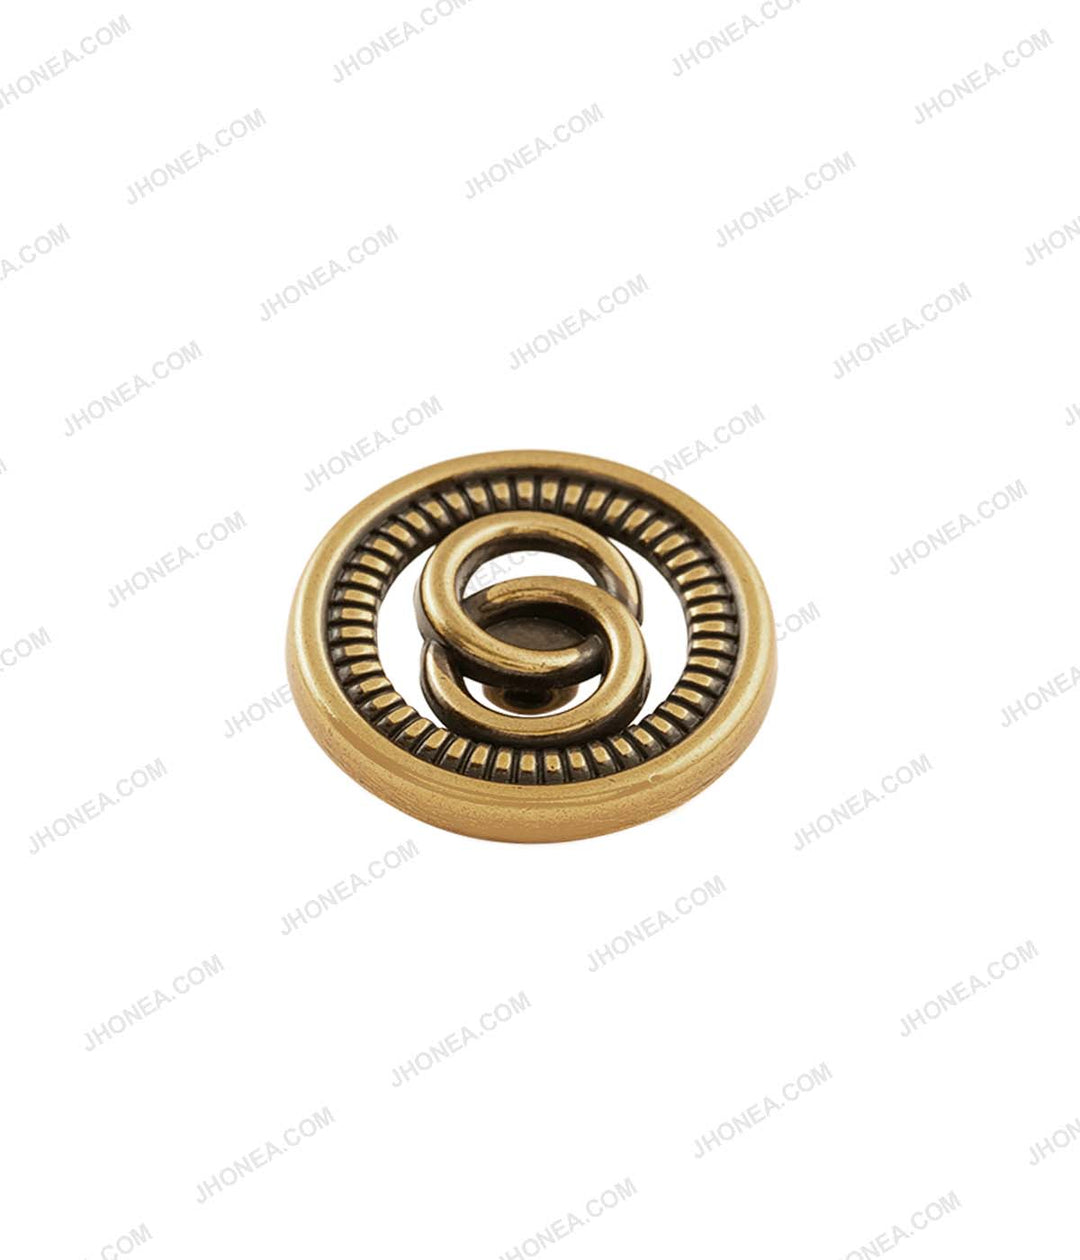 Antique Gold Infinity Design Metal Buttons for Men